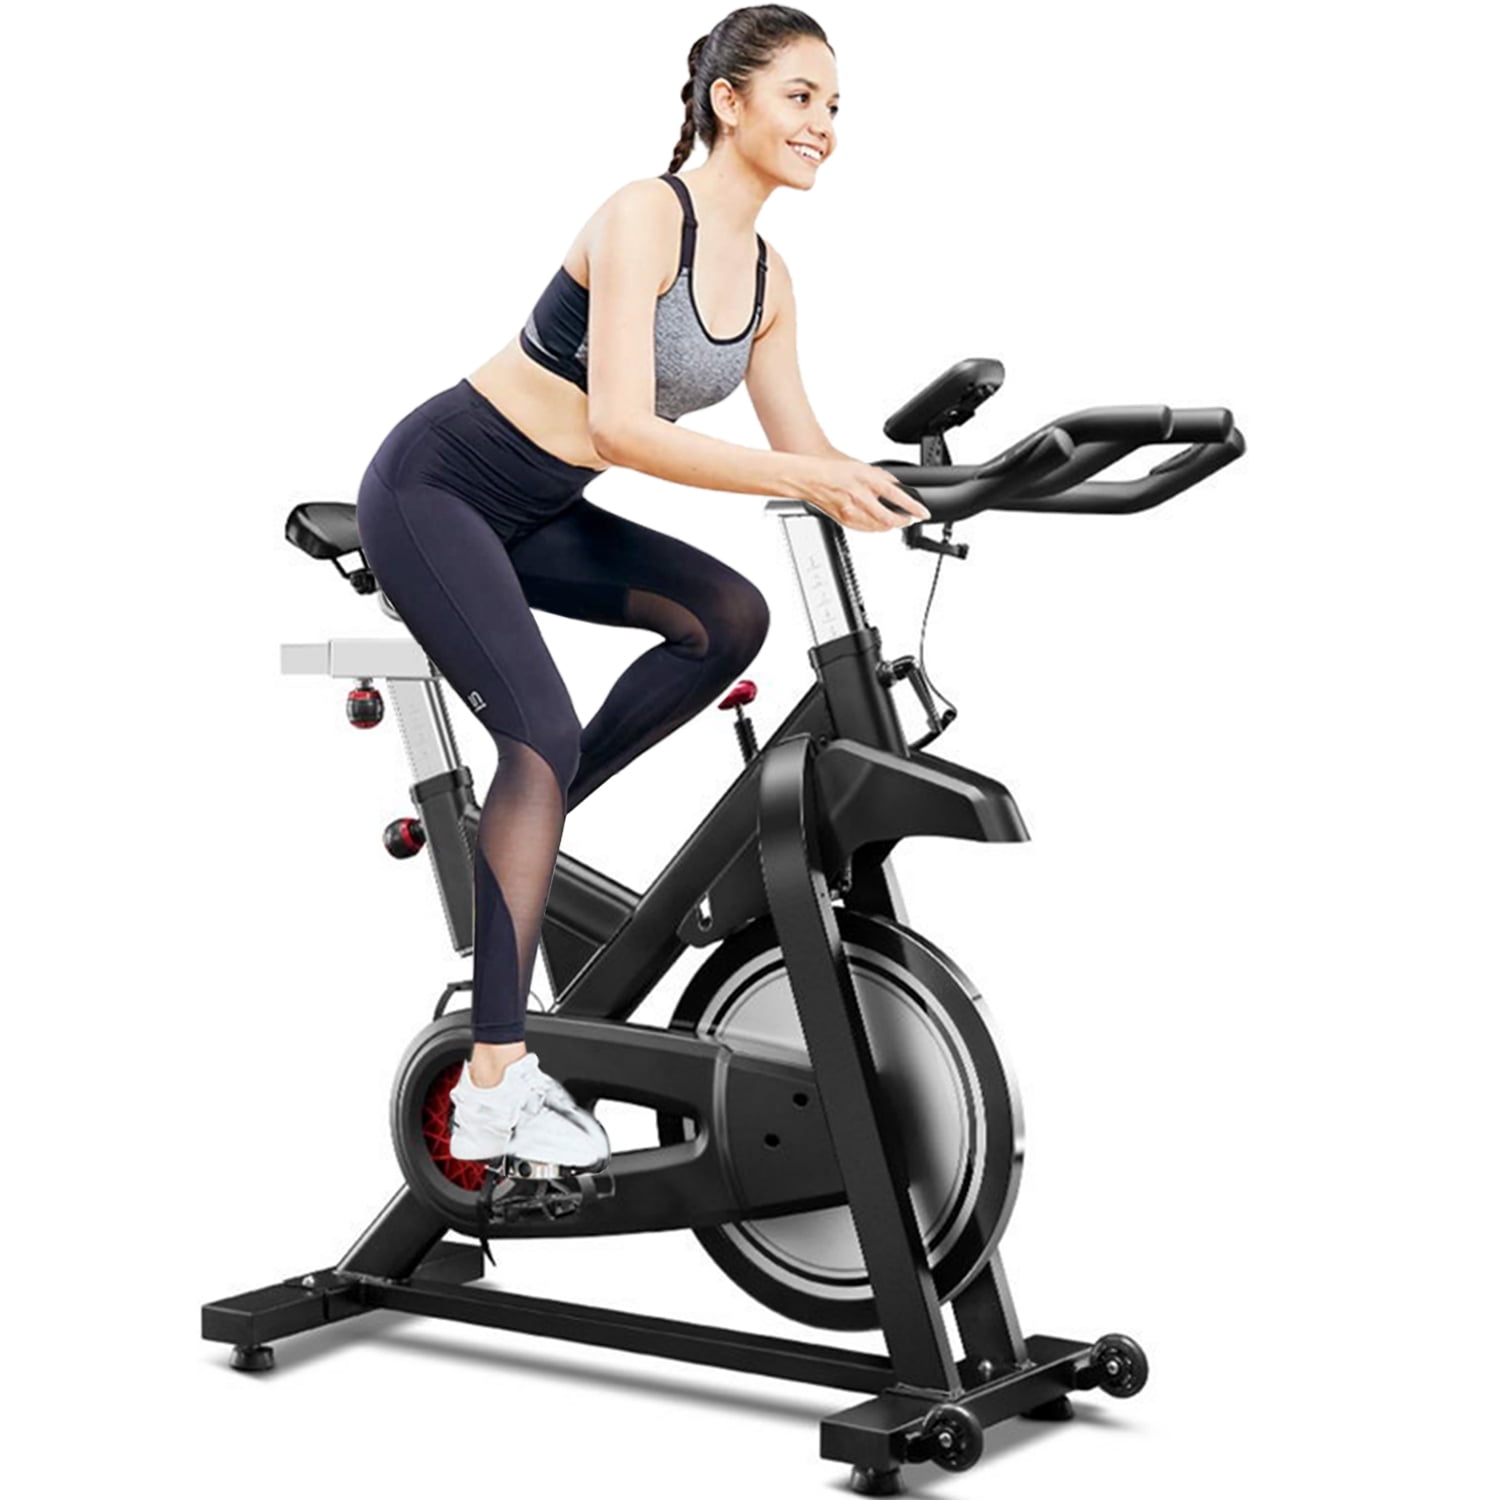 Heavy Duty Exercise Bike Cycling Cardio Gym Home Fitness Workout Indoor Machine 